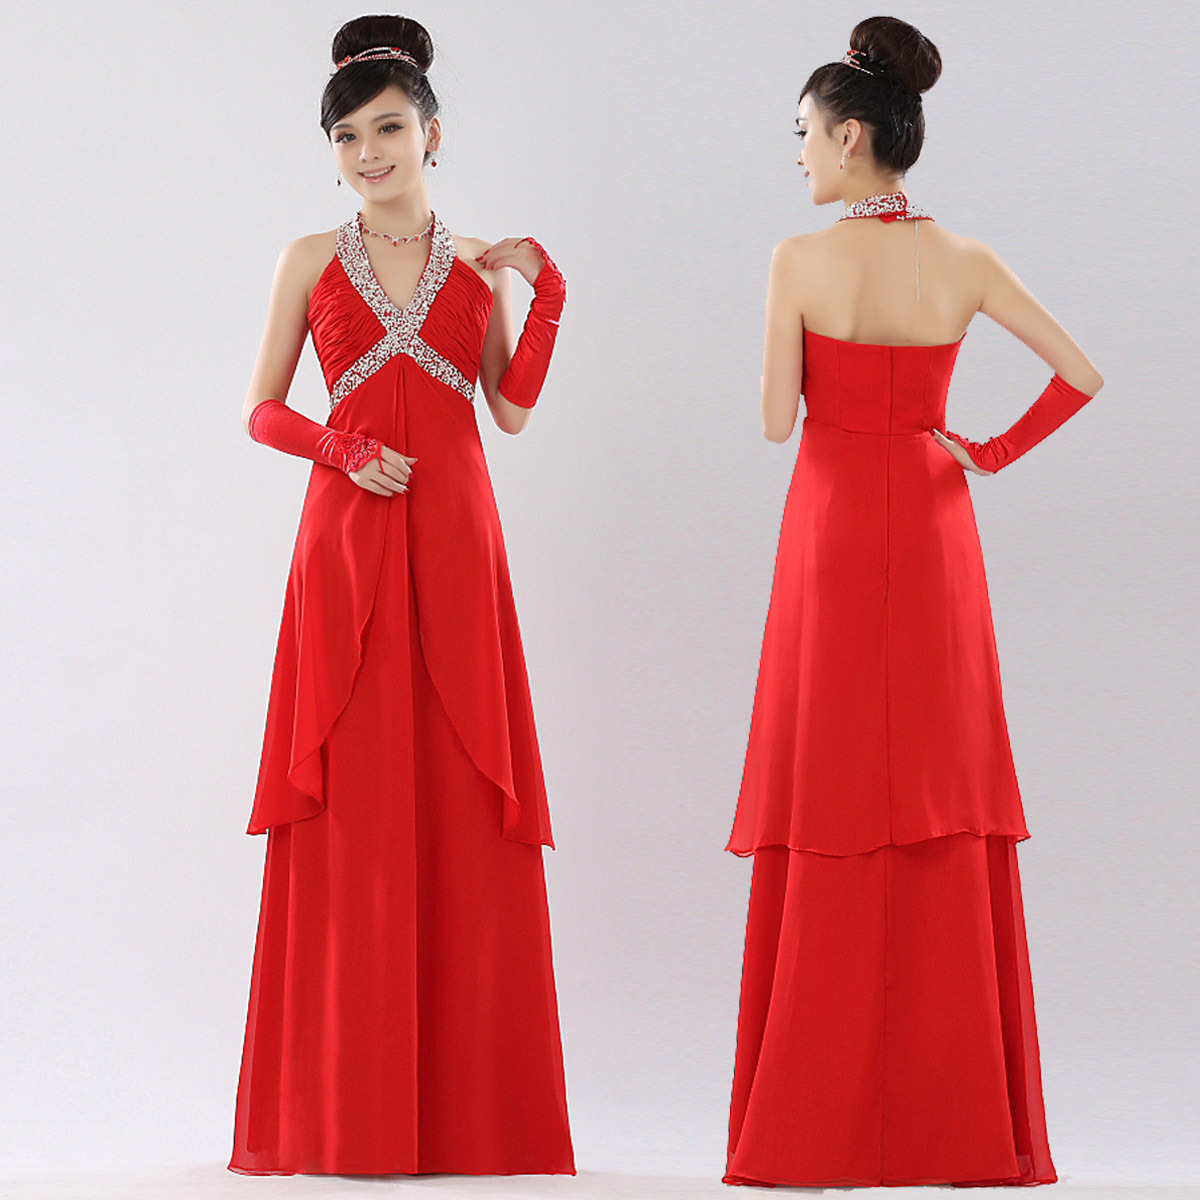 free shipping, The bride red qi in wedding married star evening dress l-060